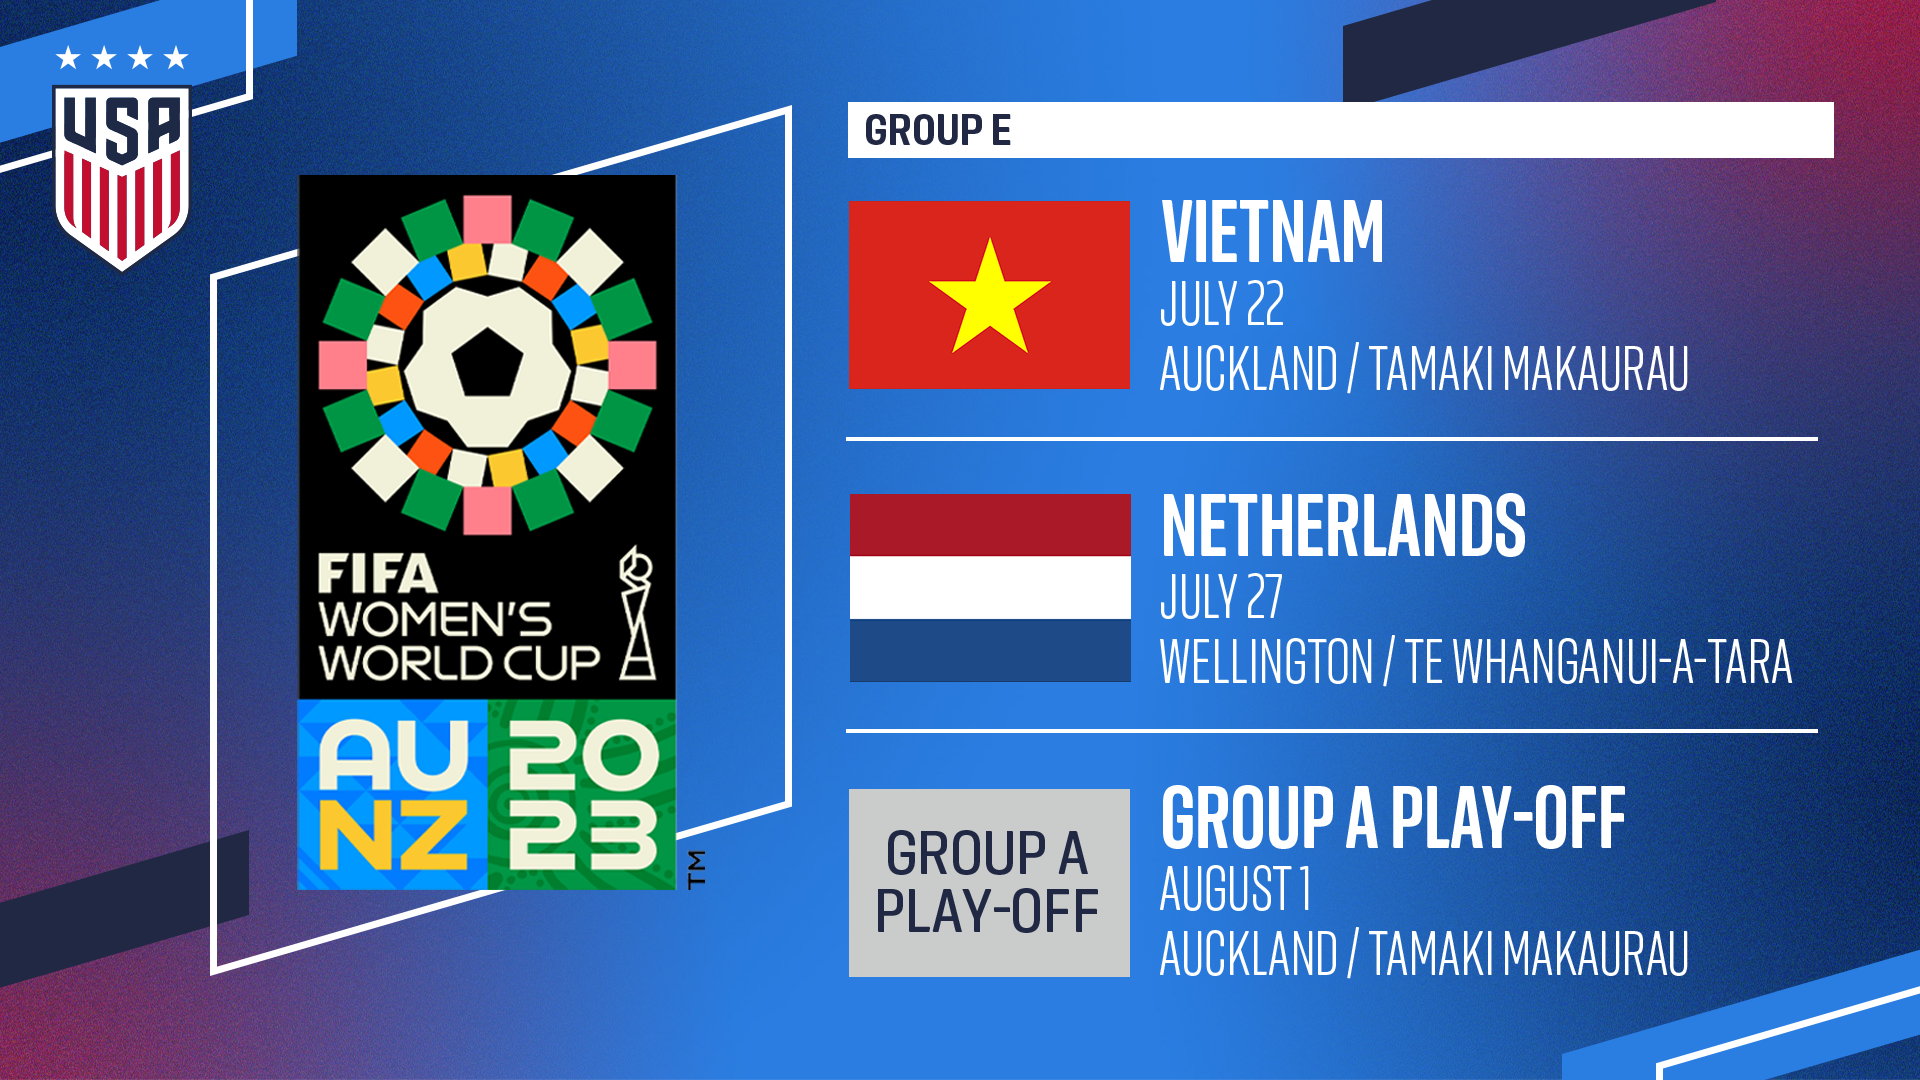 FIFA Women's World Cup 2023 Draw: The groups are set - Stumptown Footy